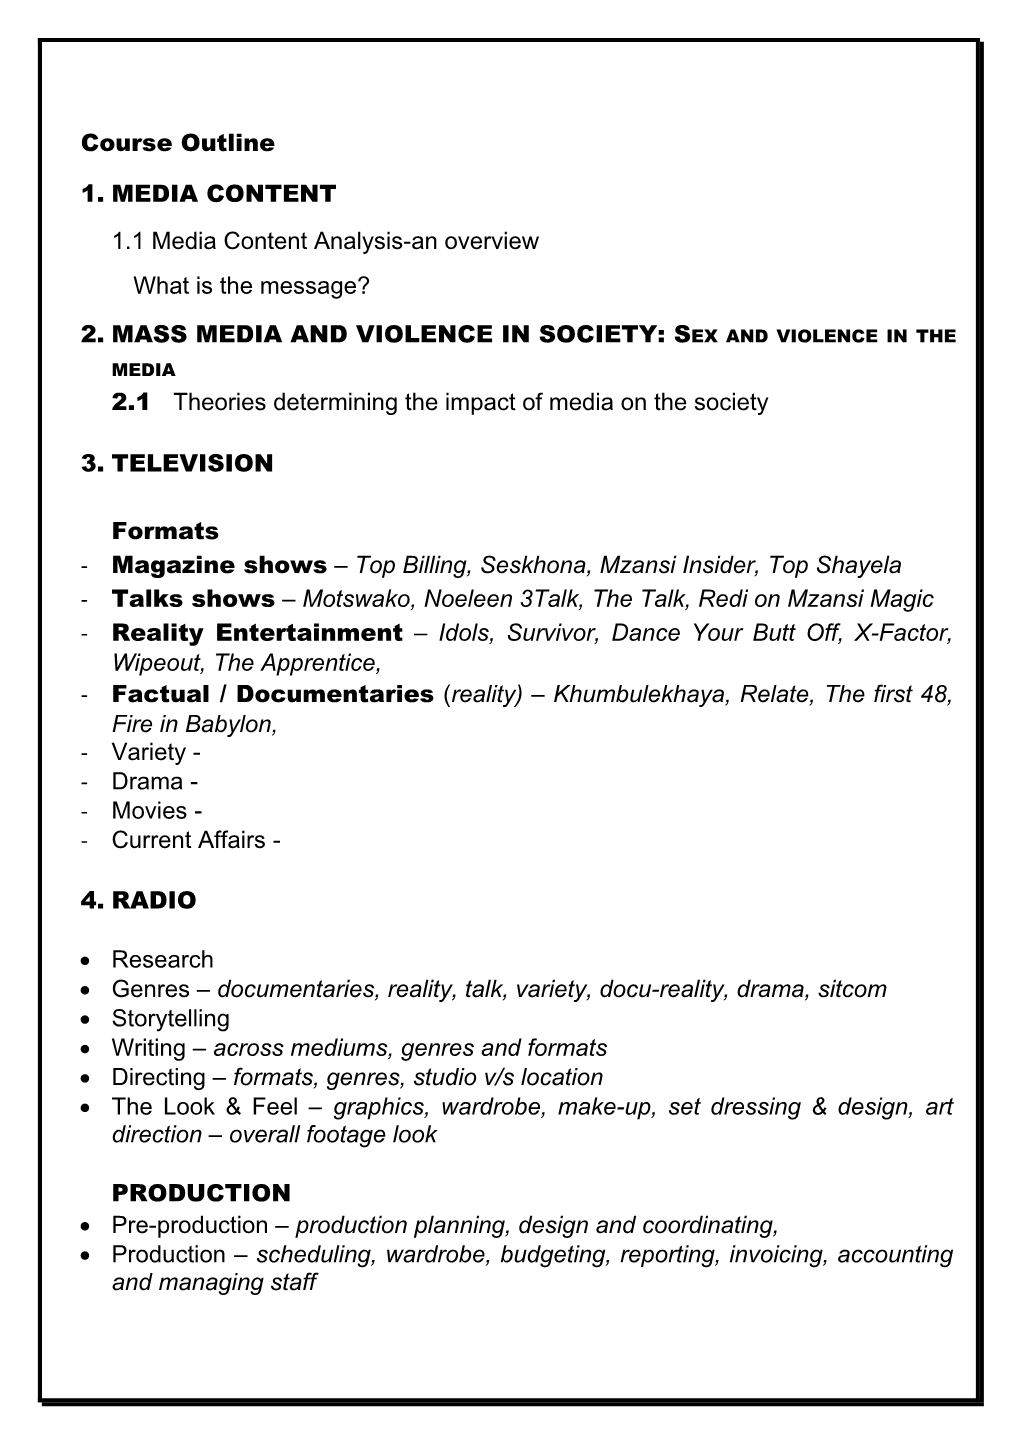 2. Mass Media and Violence in Society: Sex and Violence in the Media